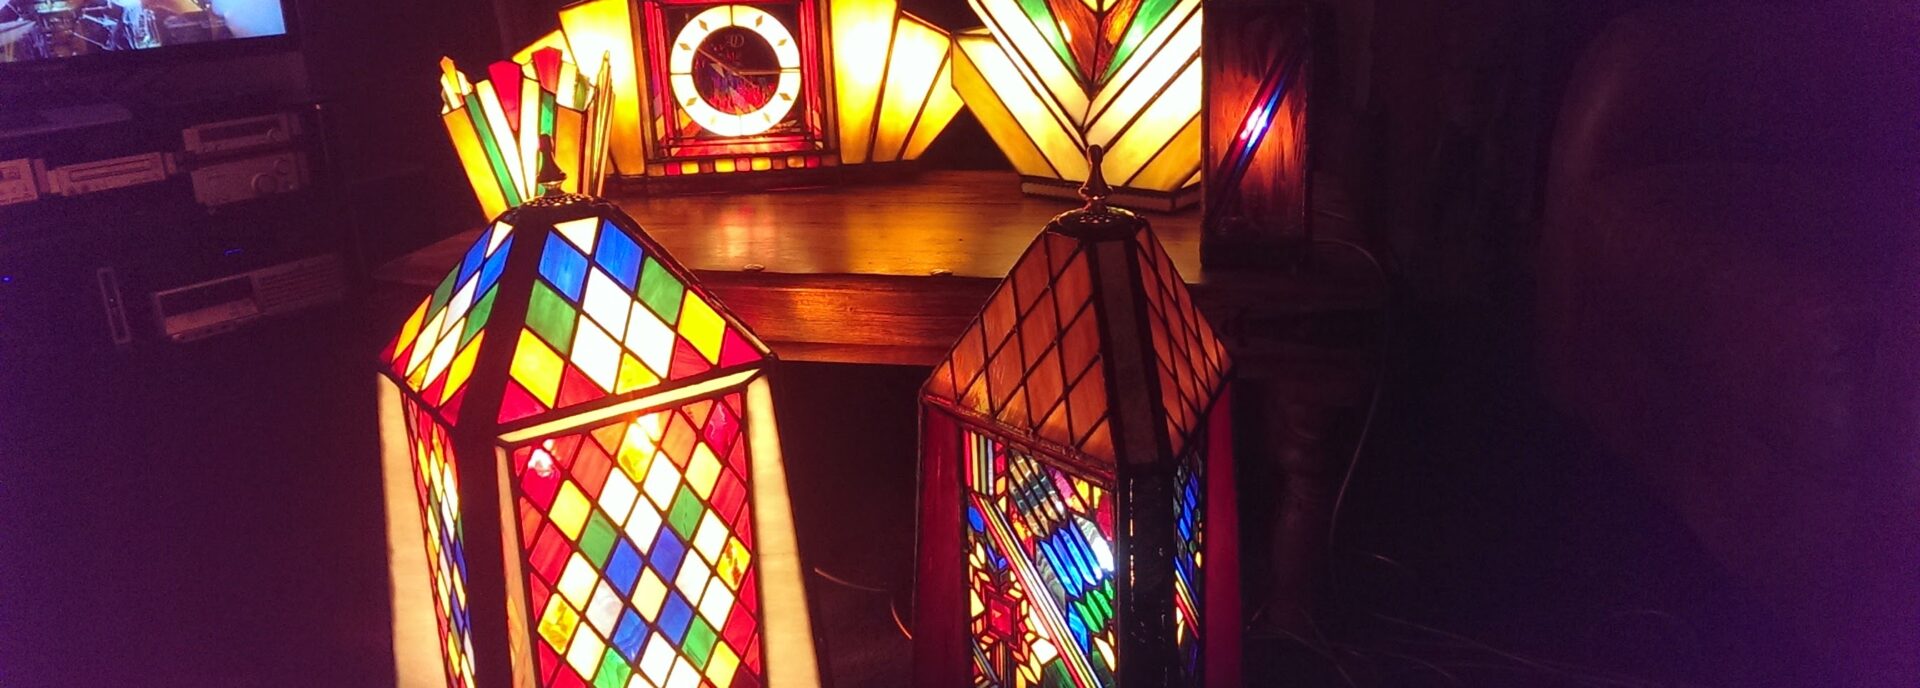 Lit up stained glass lanterns